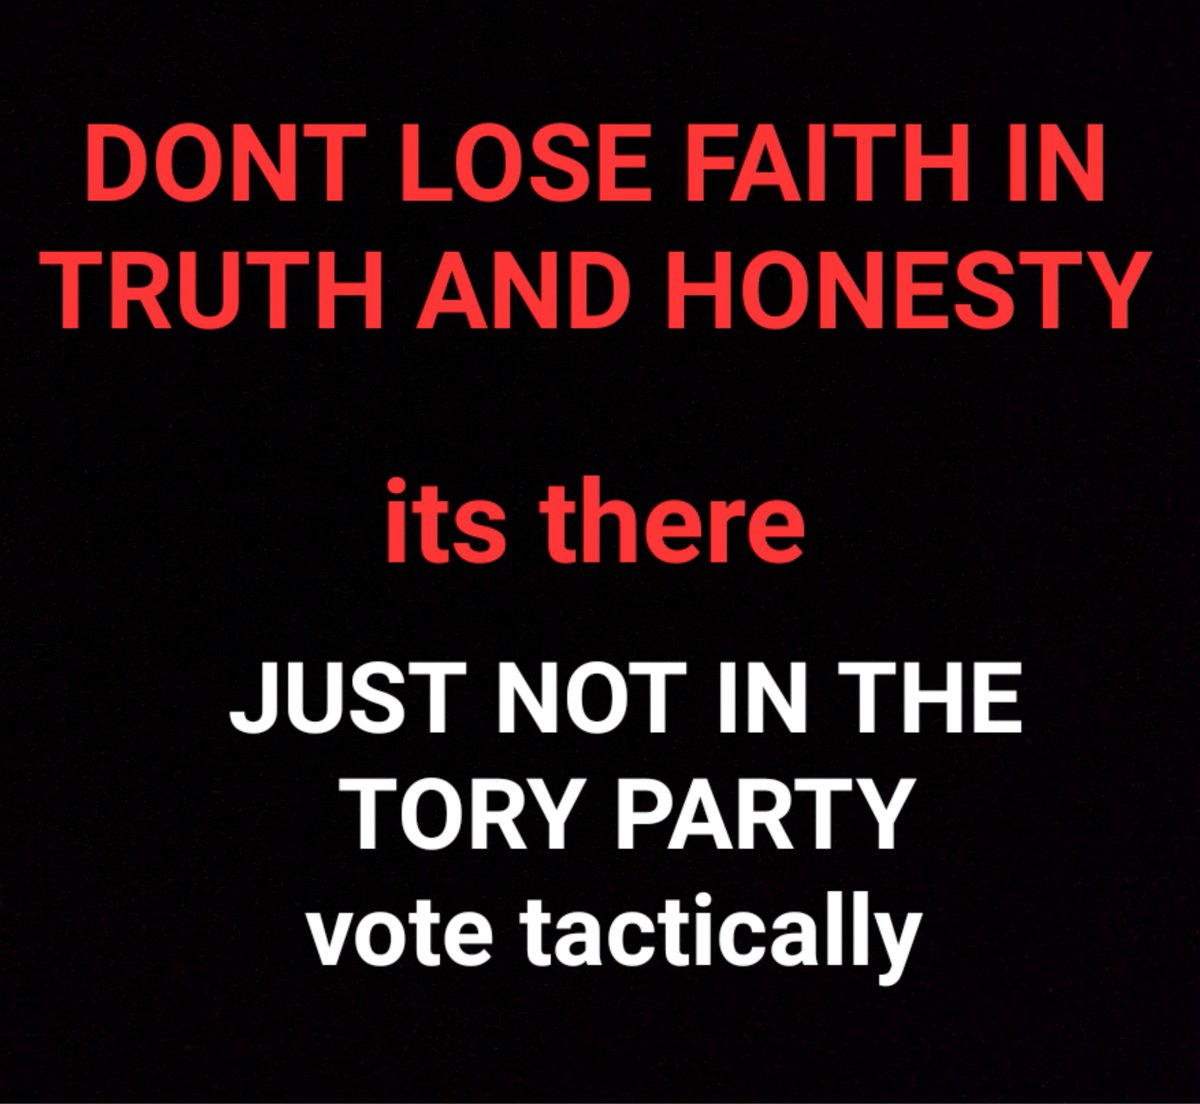 Vote tactically to get #ToriesOut658 #GeneralElectionNow #JackanoryTorys #Bregret